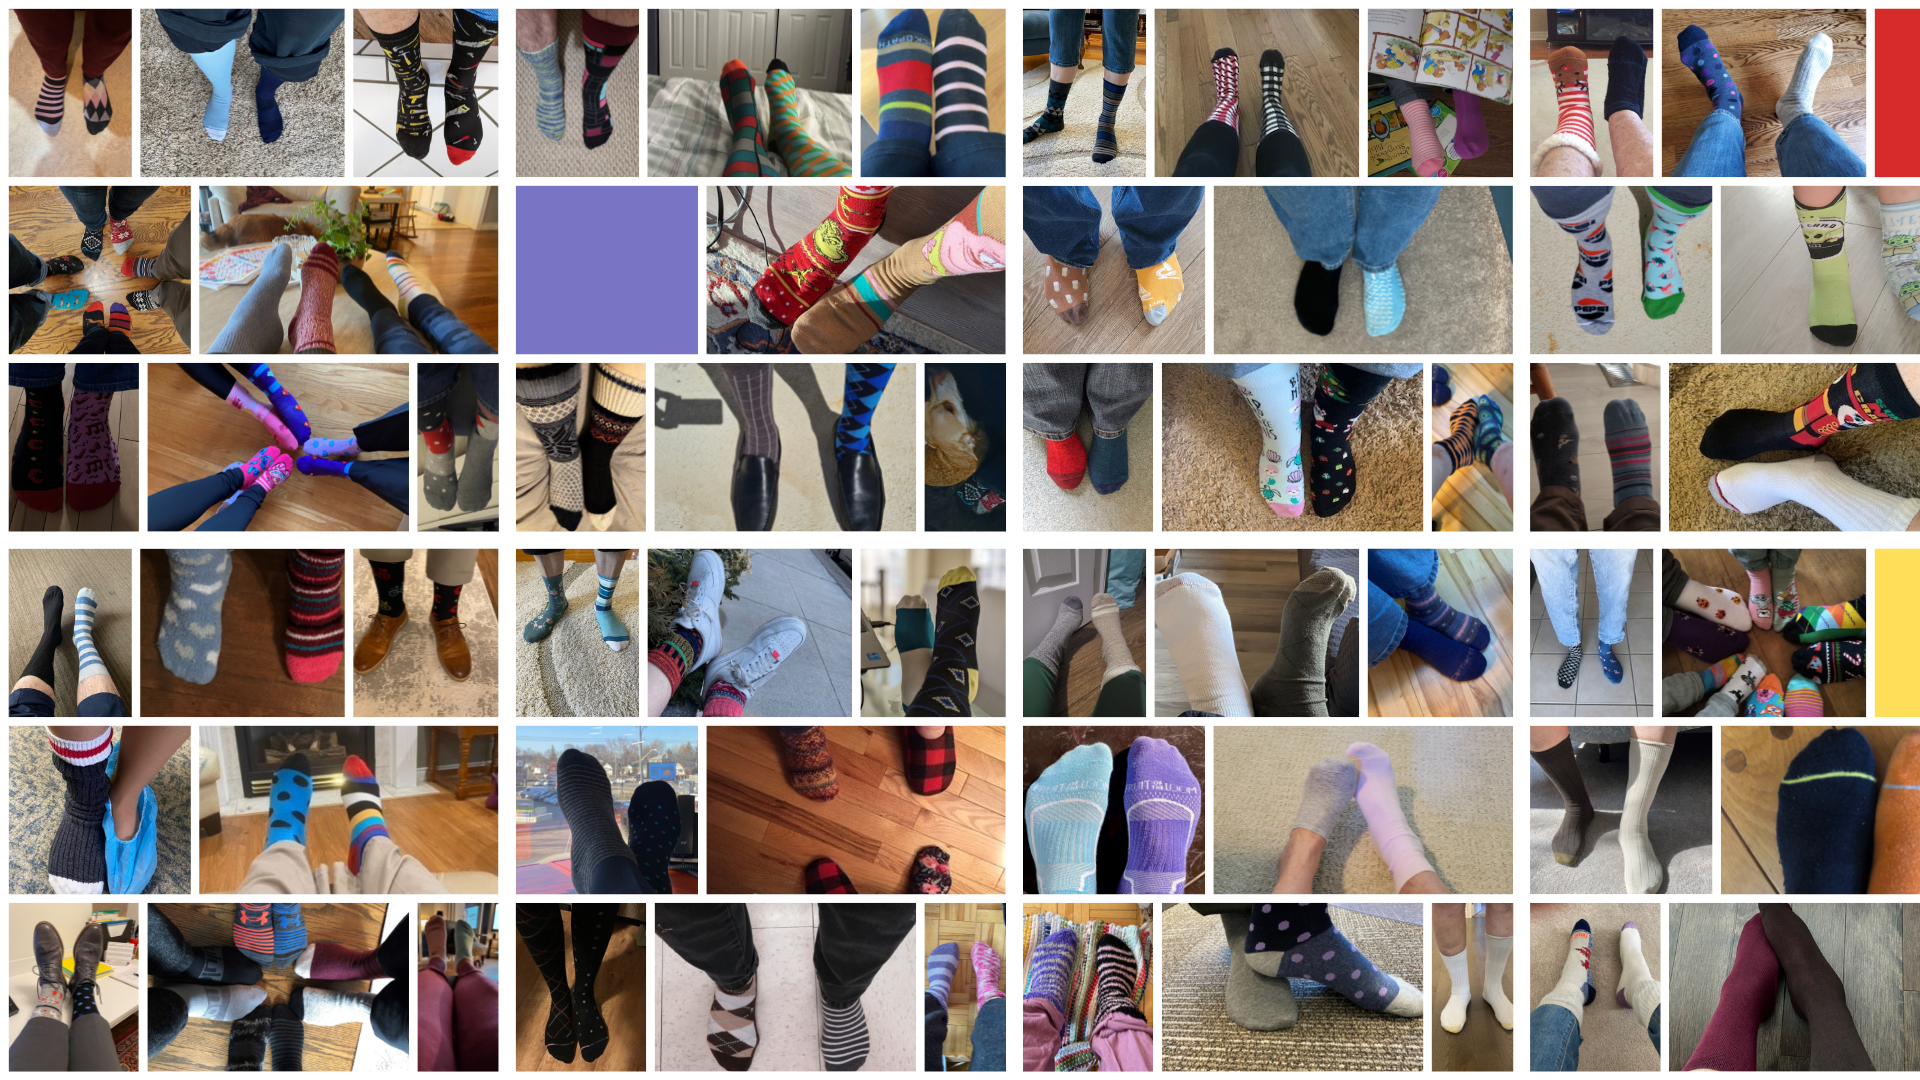 Lots of mismatched colourful socks